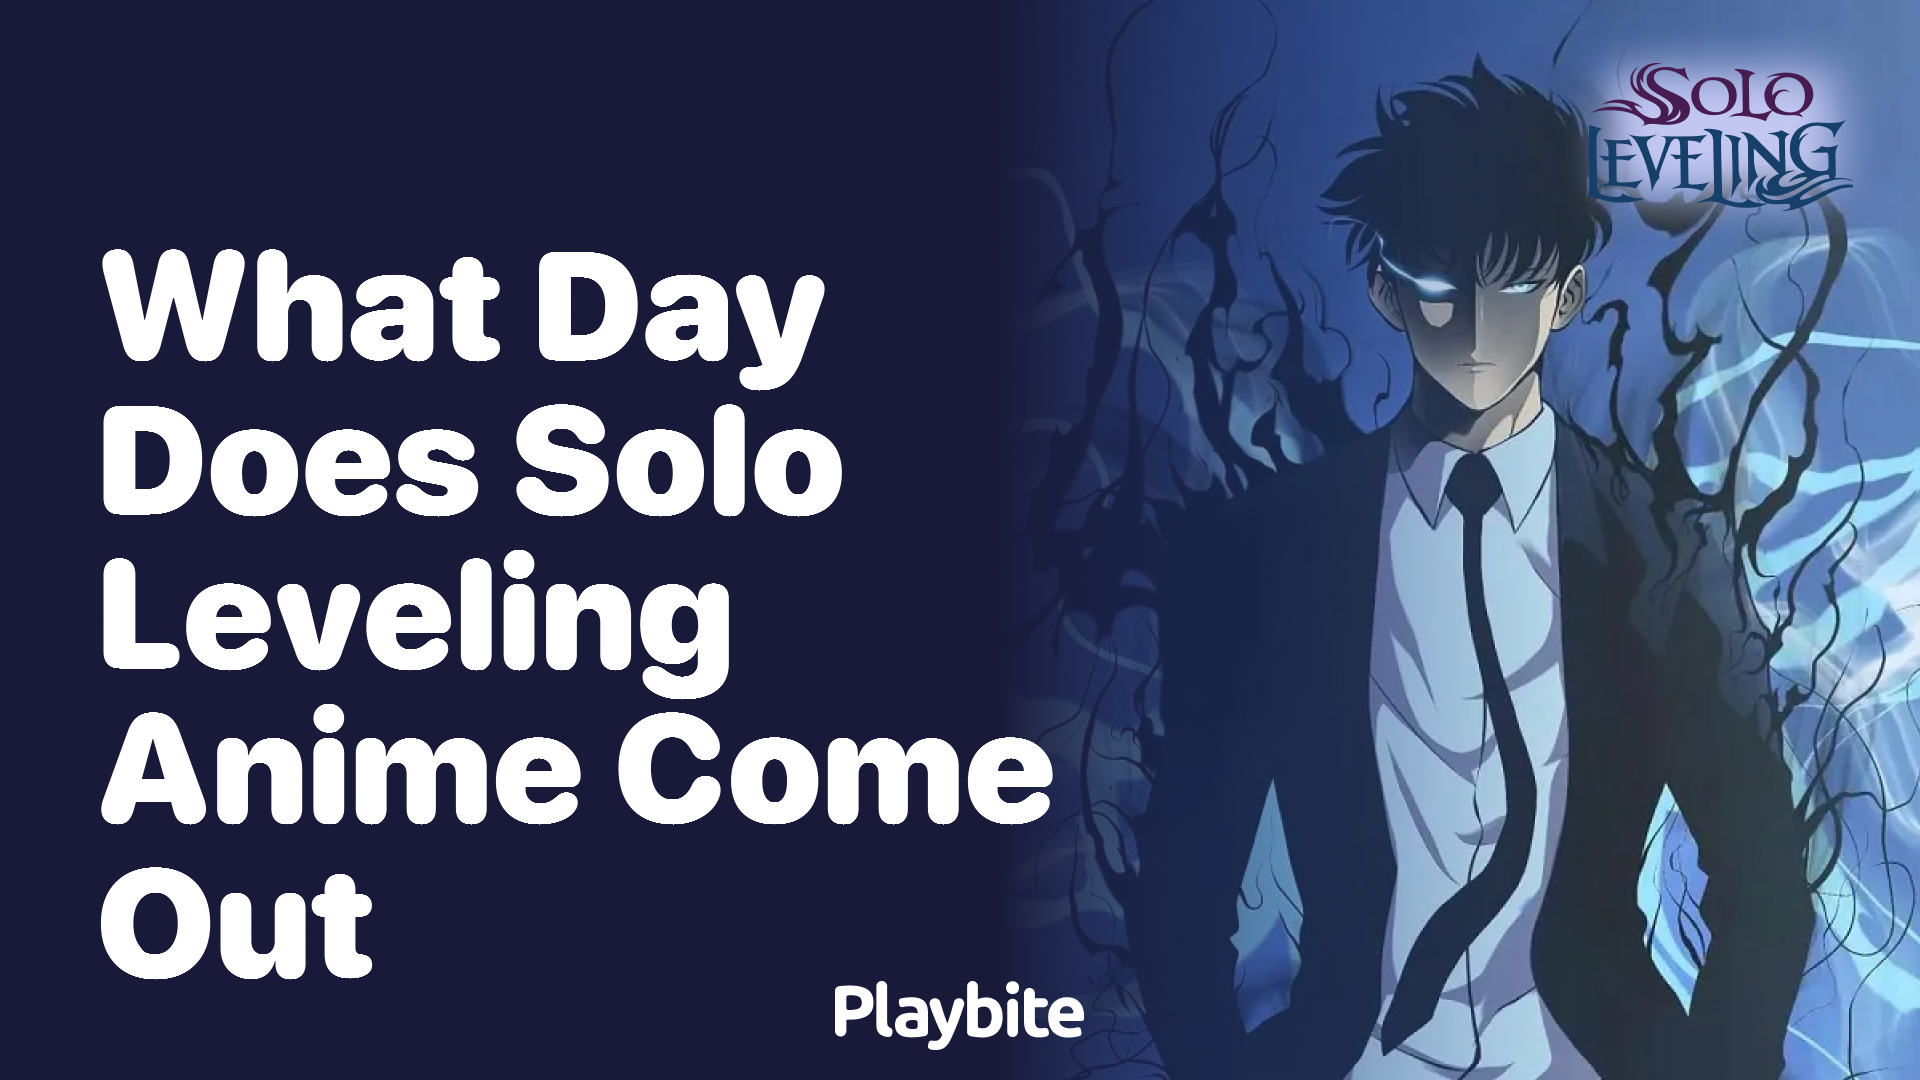 What day does Solo Leveling anime come out?